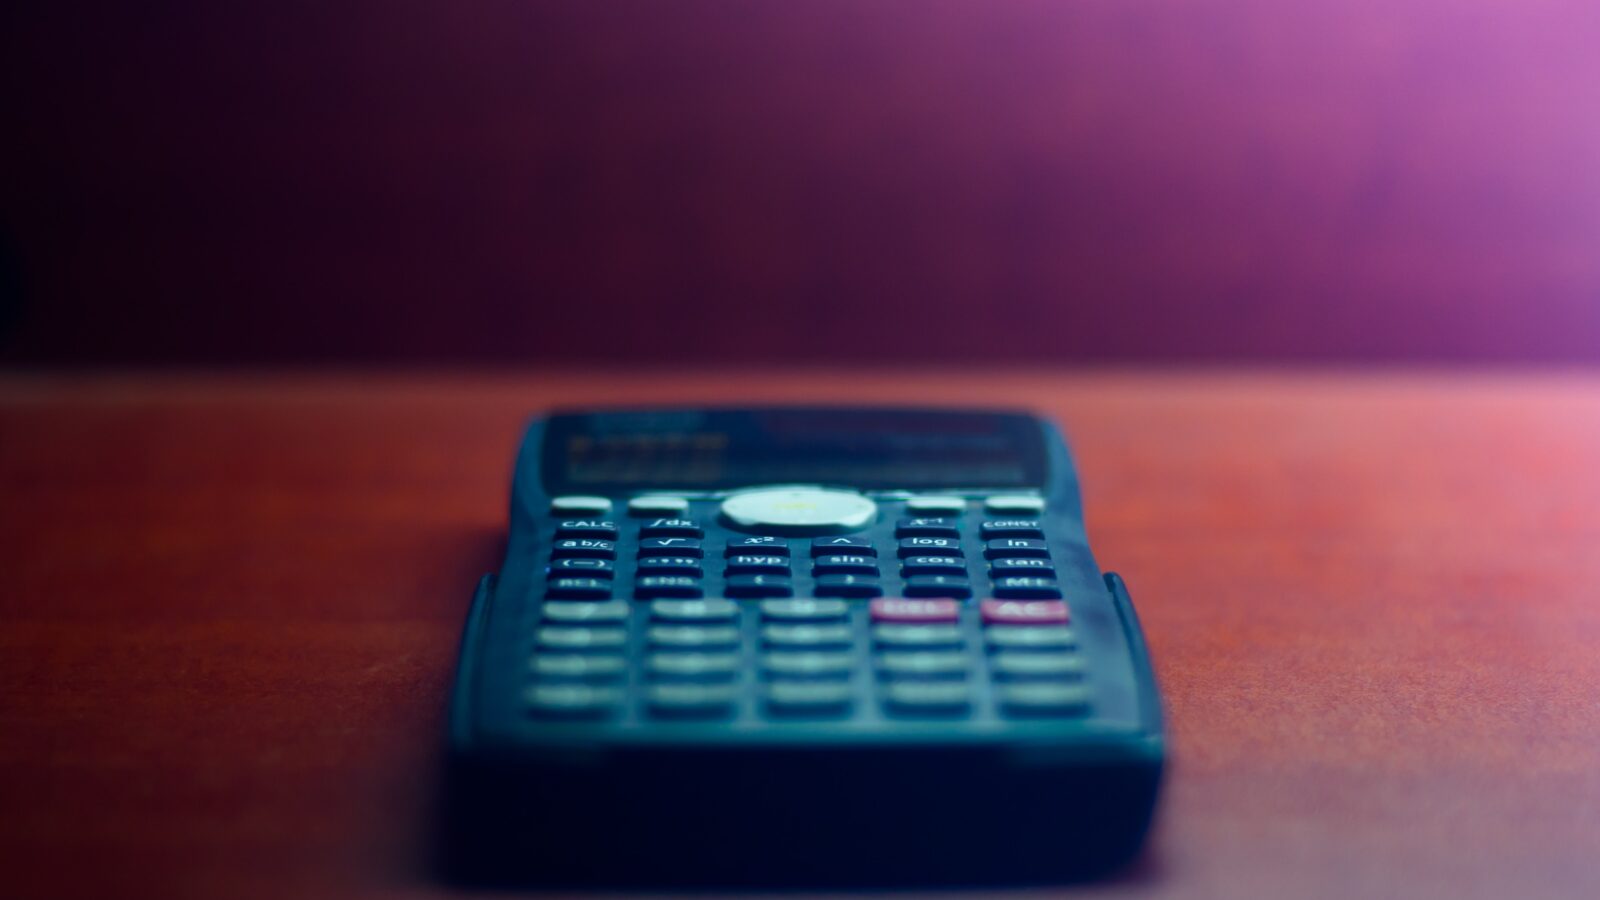 Calculator representing property division and equalization